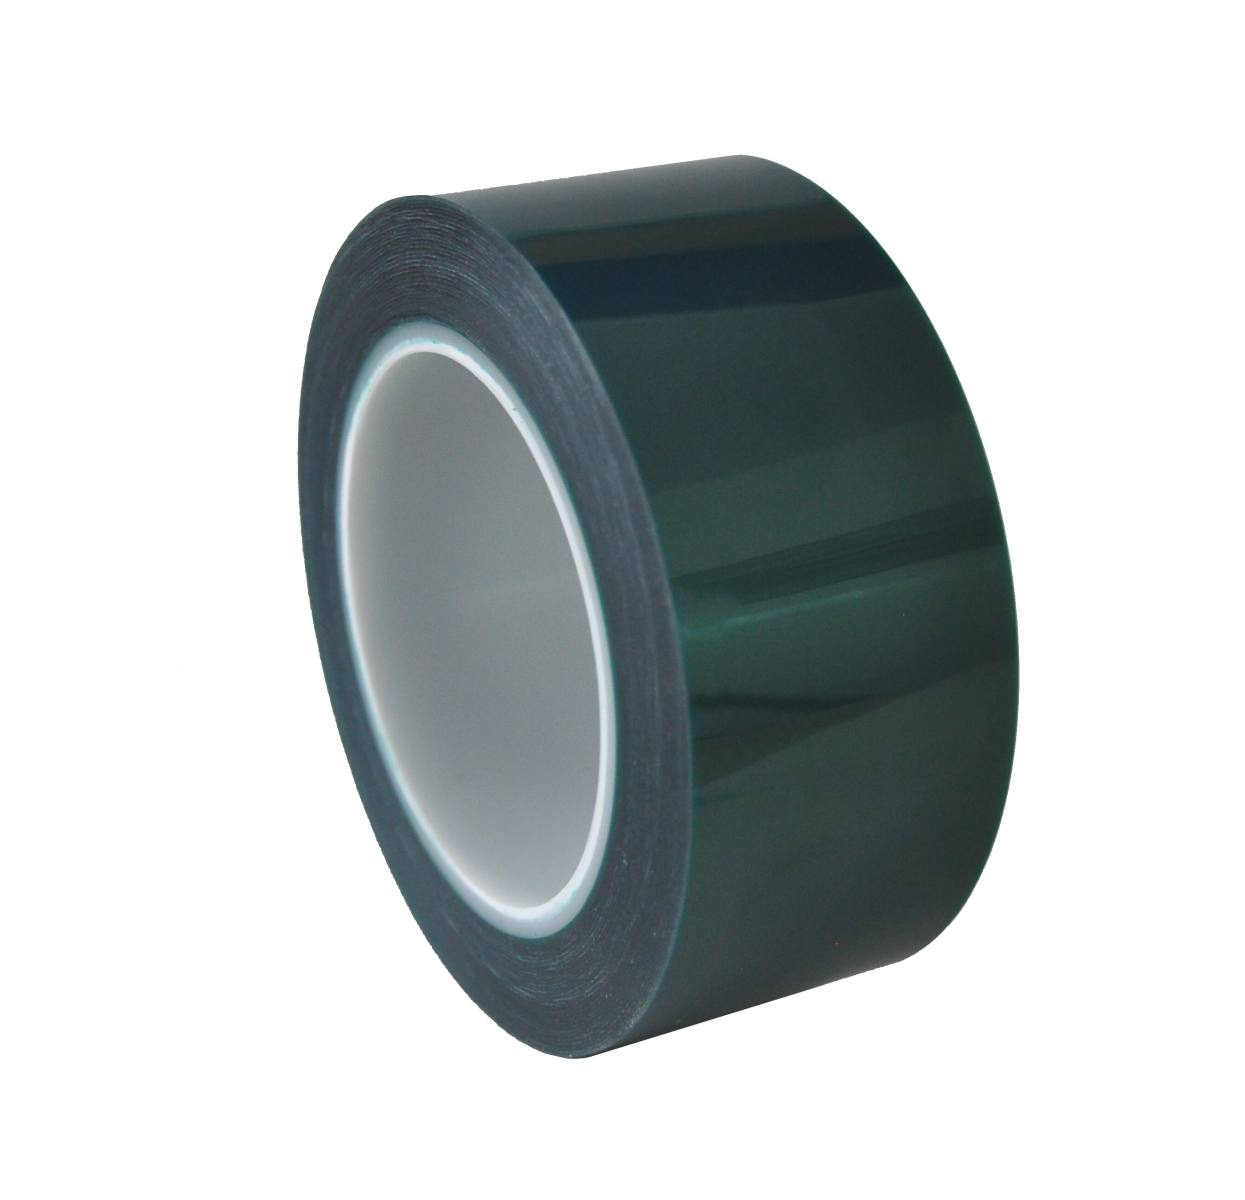 S-K-S 208G polyester adhesive tape, 38mmx66m, green